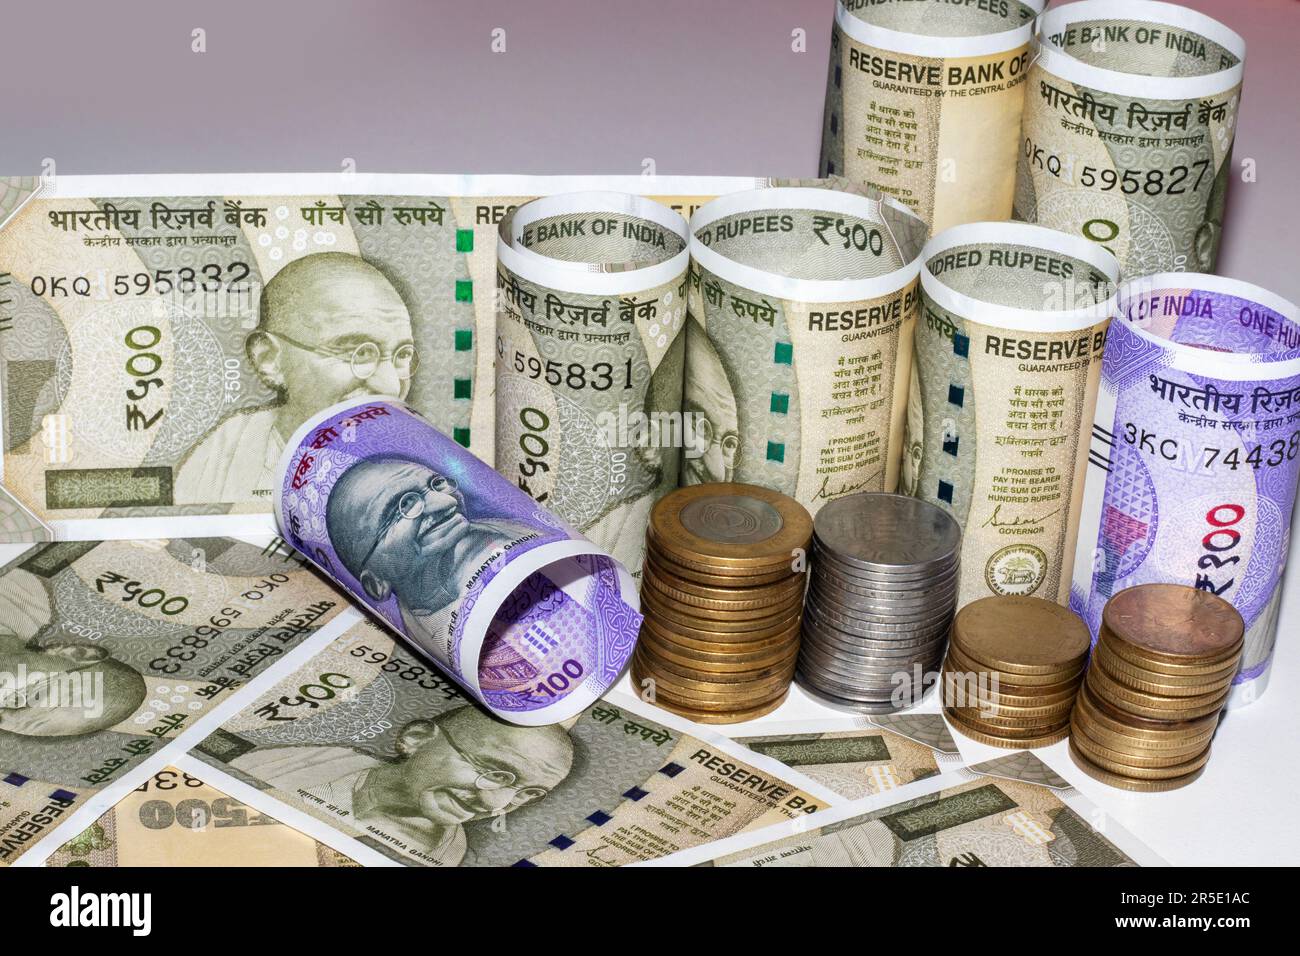 New Indian Currency 500, 100 and indian coins Stock Photo